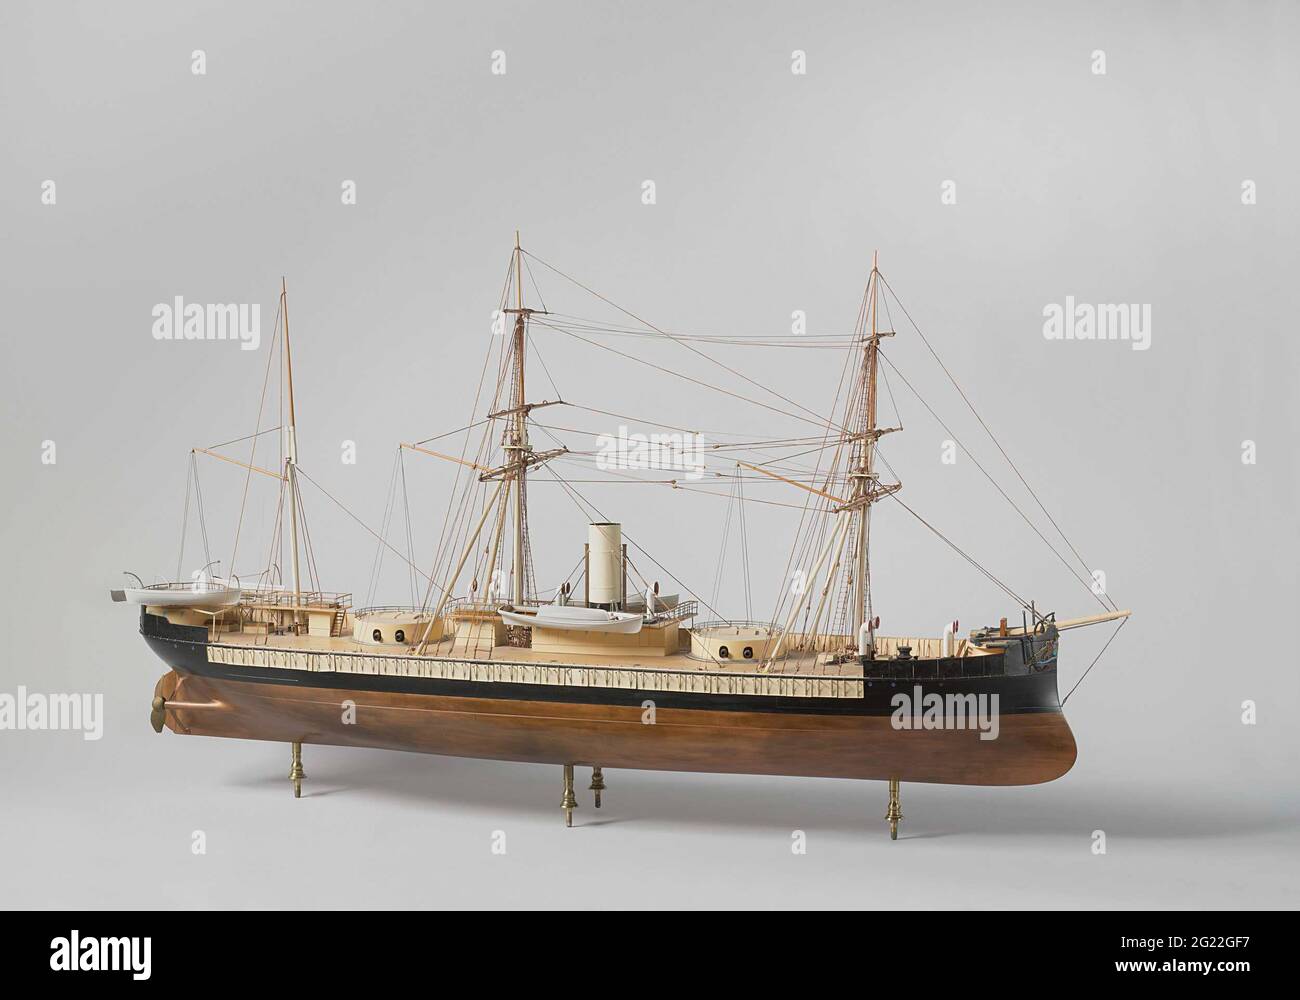 Model of An IronClad Ram Ship. Polychromed and witnessed block model of a ram tower vessel, the base board is missing. It has the national arms on a bow and mirror. The model has a ramsteven, a sharp cruiser gate, stir with rounded sheet, two double-leaf screws. It has two dome with two pieces each; There are two deck stores on the stern, connected by running corridors, two between the two domes, also connected by walking corridors, a deck house by the bow. The railing can be lowered before shooting. The chimney stands on the front deck house between the domes, part of the railing there has ca Stock Photo